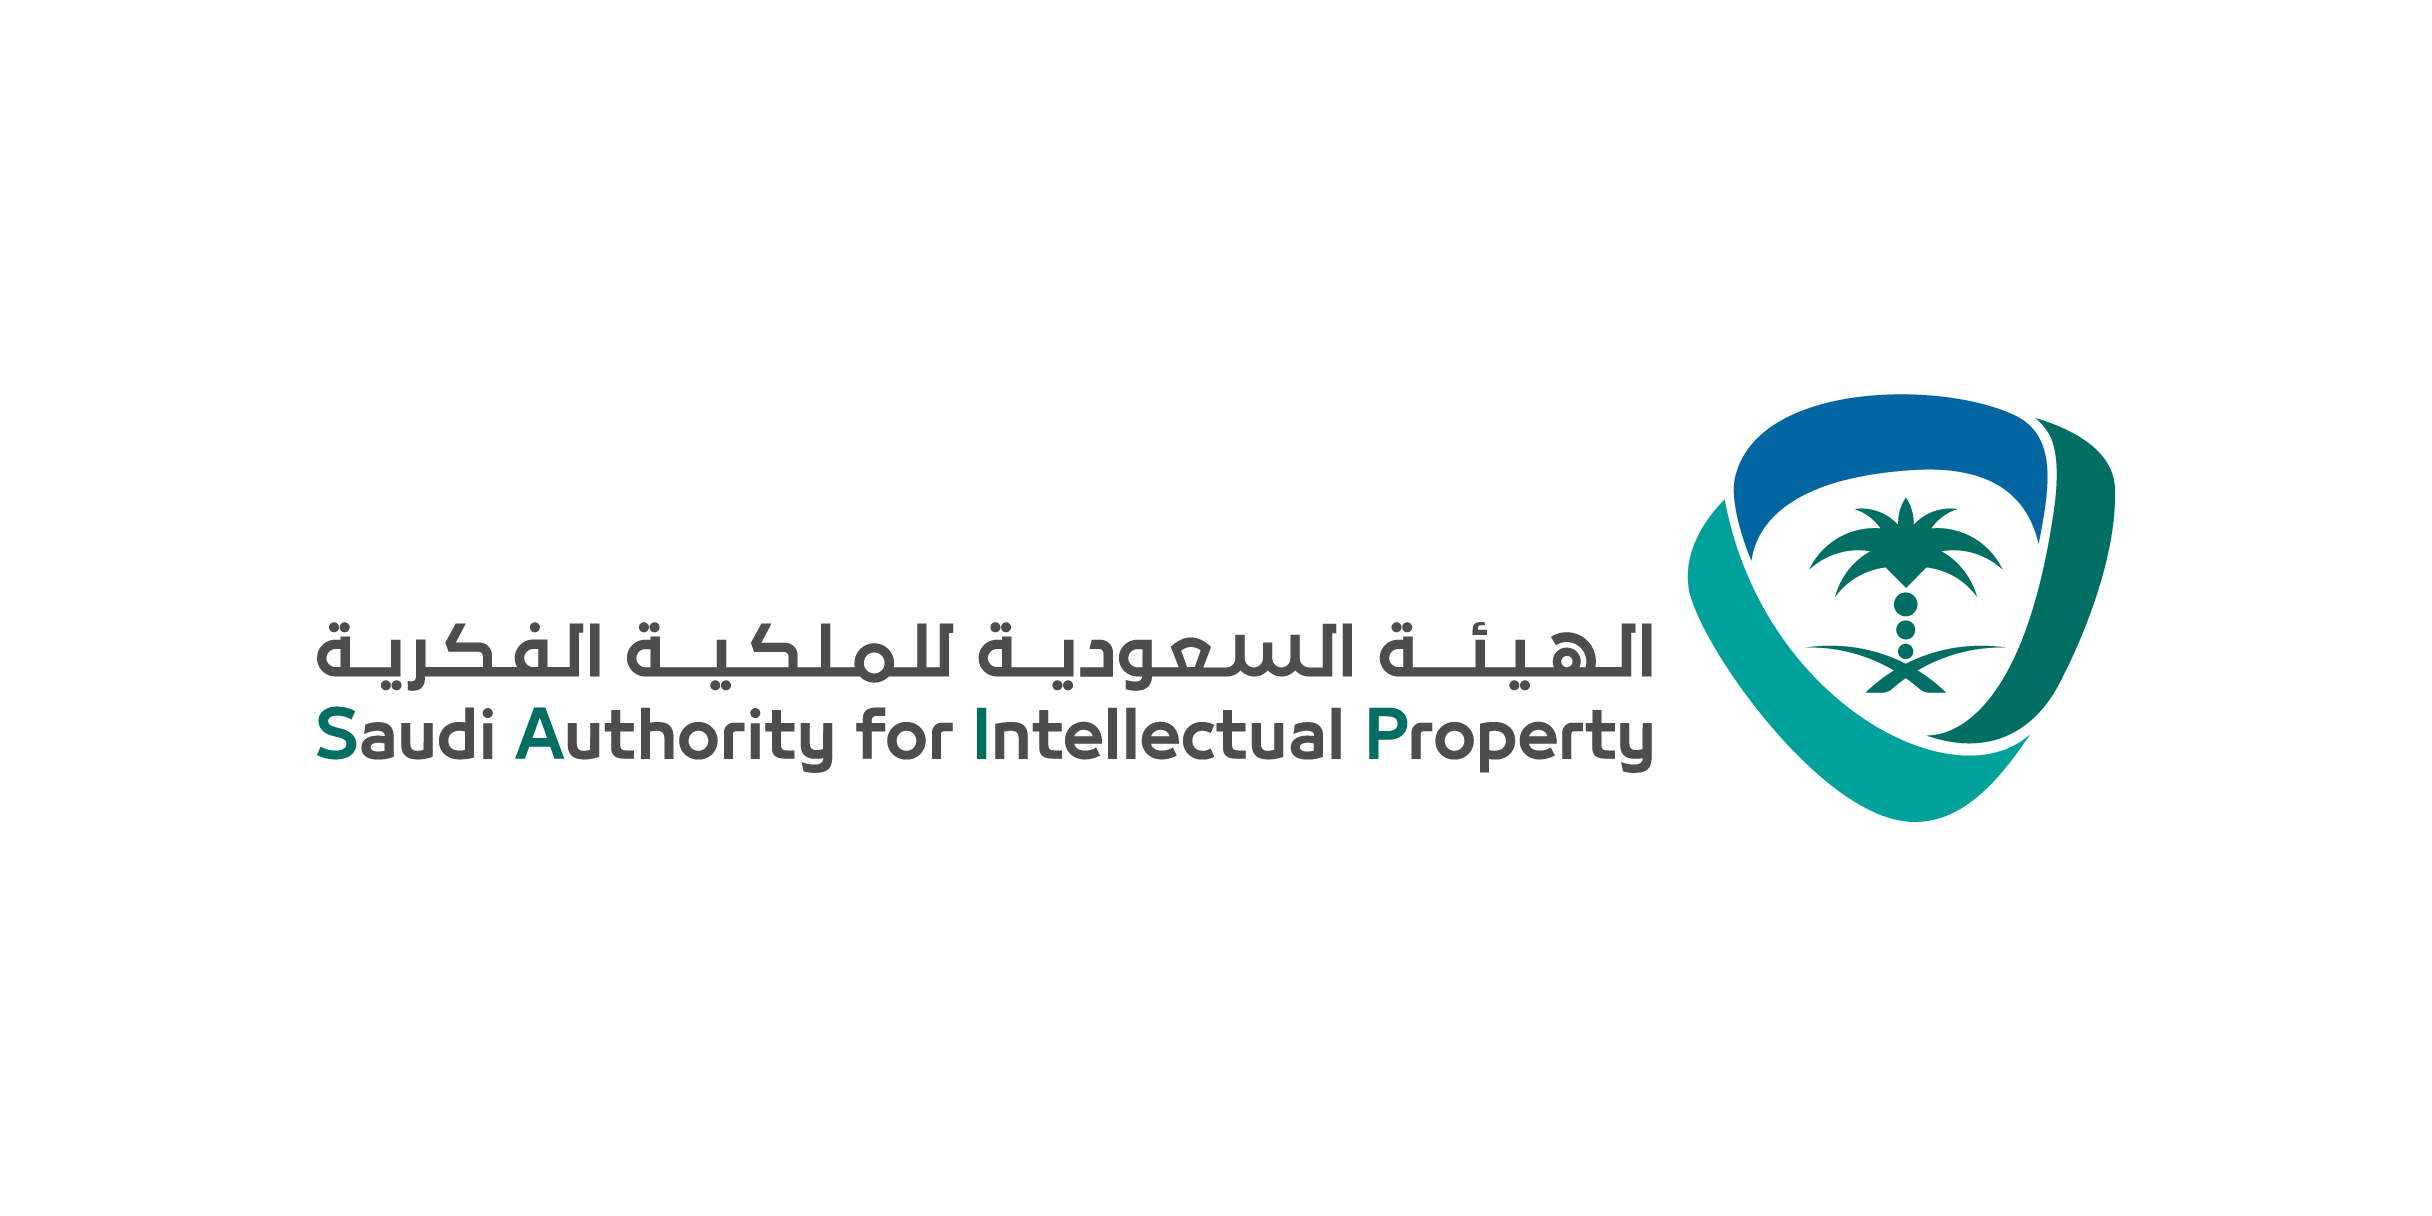 Saudi Authority for Intellectual Property